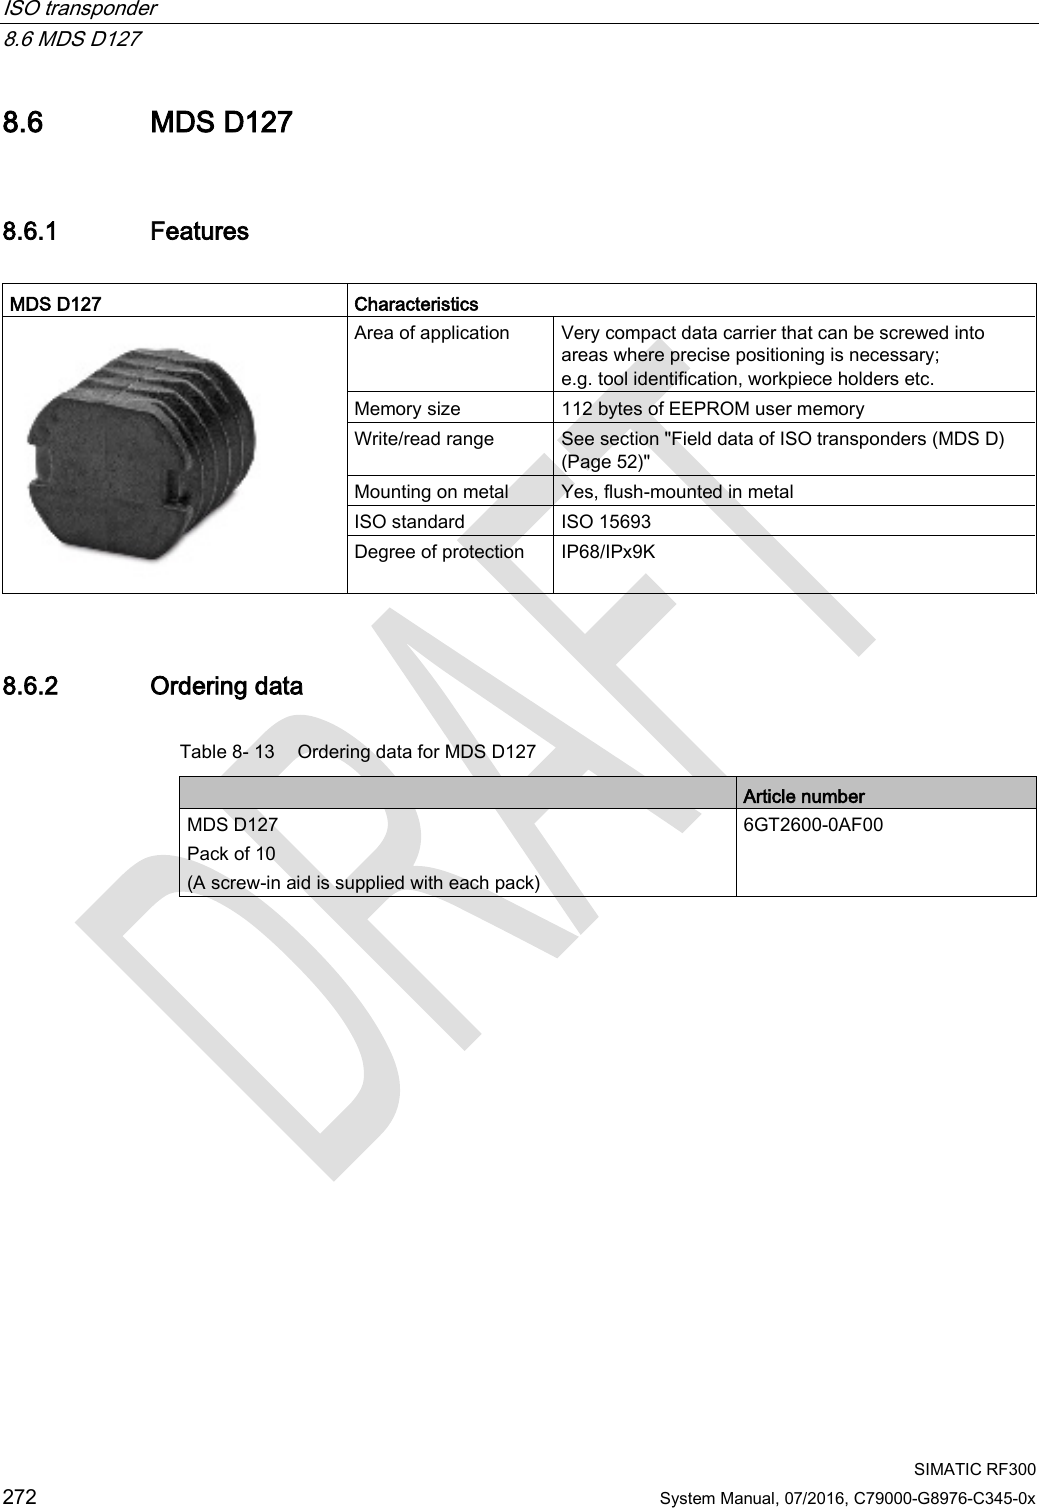 ISO transponder   8.6 MDS D127  SIMATIC RF300 272 System Manual, 07/2016, C79000-G8976-C345-0x 8.6 MDS D127 8.6.1 Features  MDS D127 Characteristics  Area of application Very compact data carrier that can be screwed into areas where precise positioning is necessary; e.g. tool identification, workpiece holders etc. Memory size 112 bytes of EEPROM user memory Write/read range See section &quot;Field data of ISO transponders (MDS D) (Page 52)&quot; Mounting on metal Yes, flush-mounted in metal ISO standard ISO 15693 Degree of protection IP68/IPx9K 8.6.2 Ordering data Table 8- 13 Ordering data for MDS D127  Article number MDS D127 Pack of 10 (A screw-in aid is supplied with each pack) 6GT2600-0AF00 